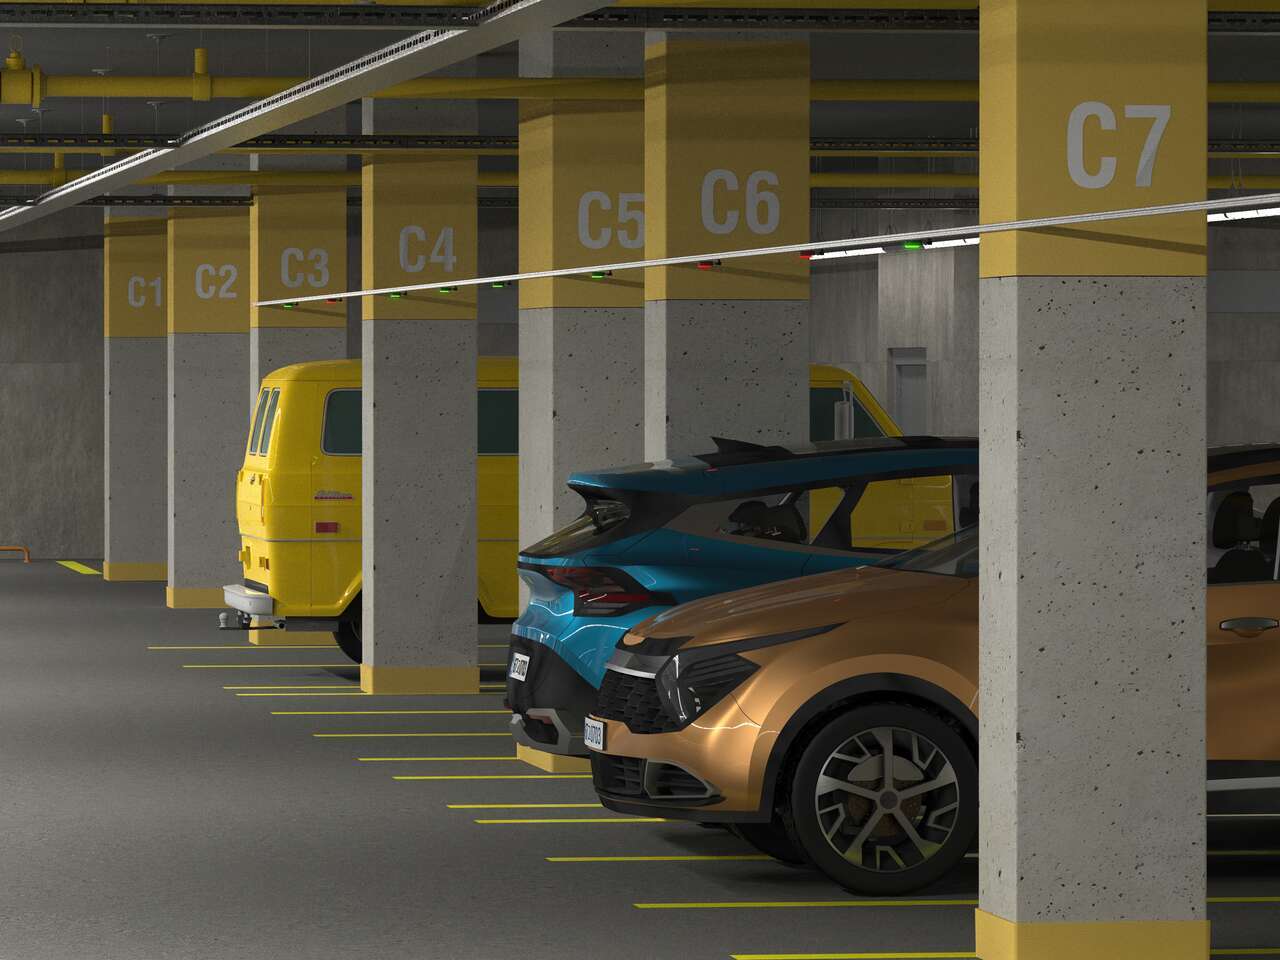 Detecting Parking Spot Availability